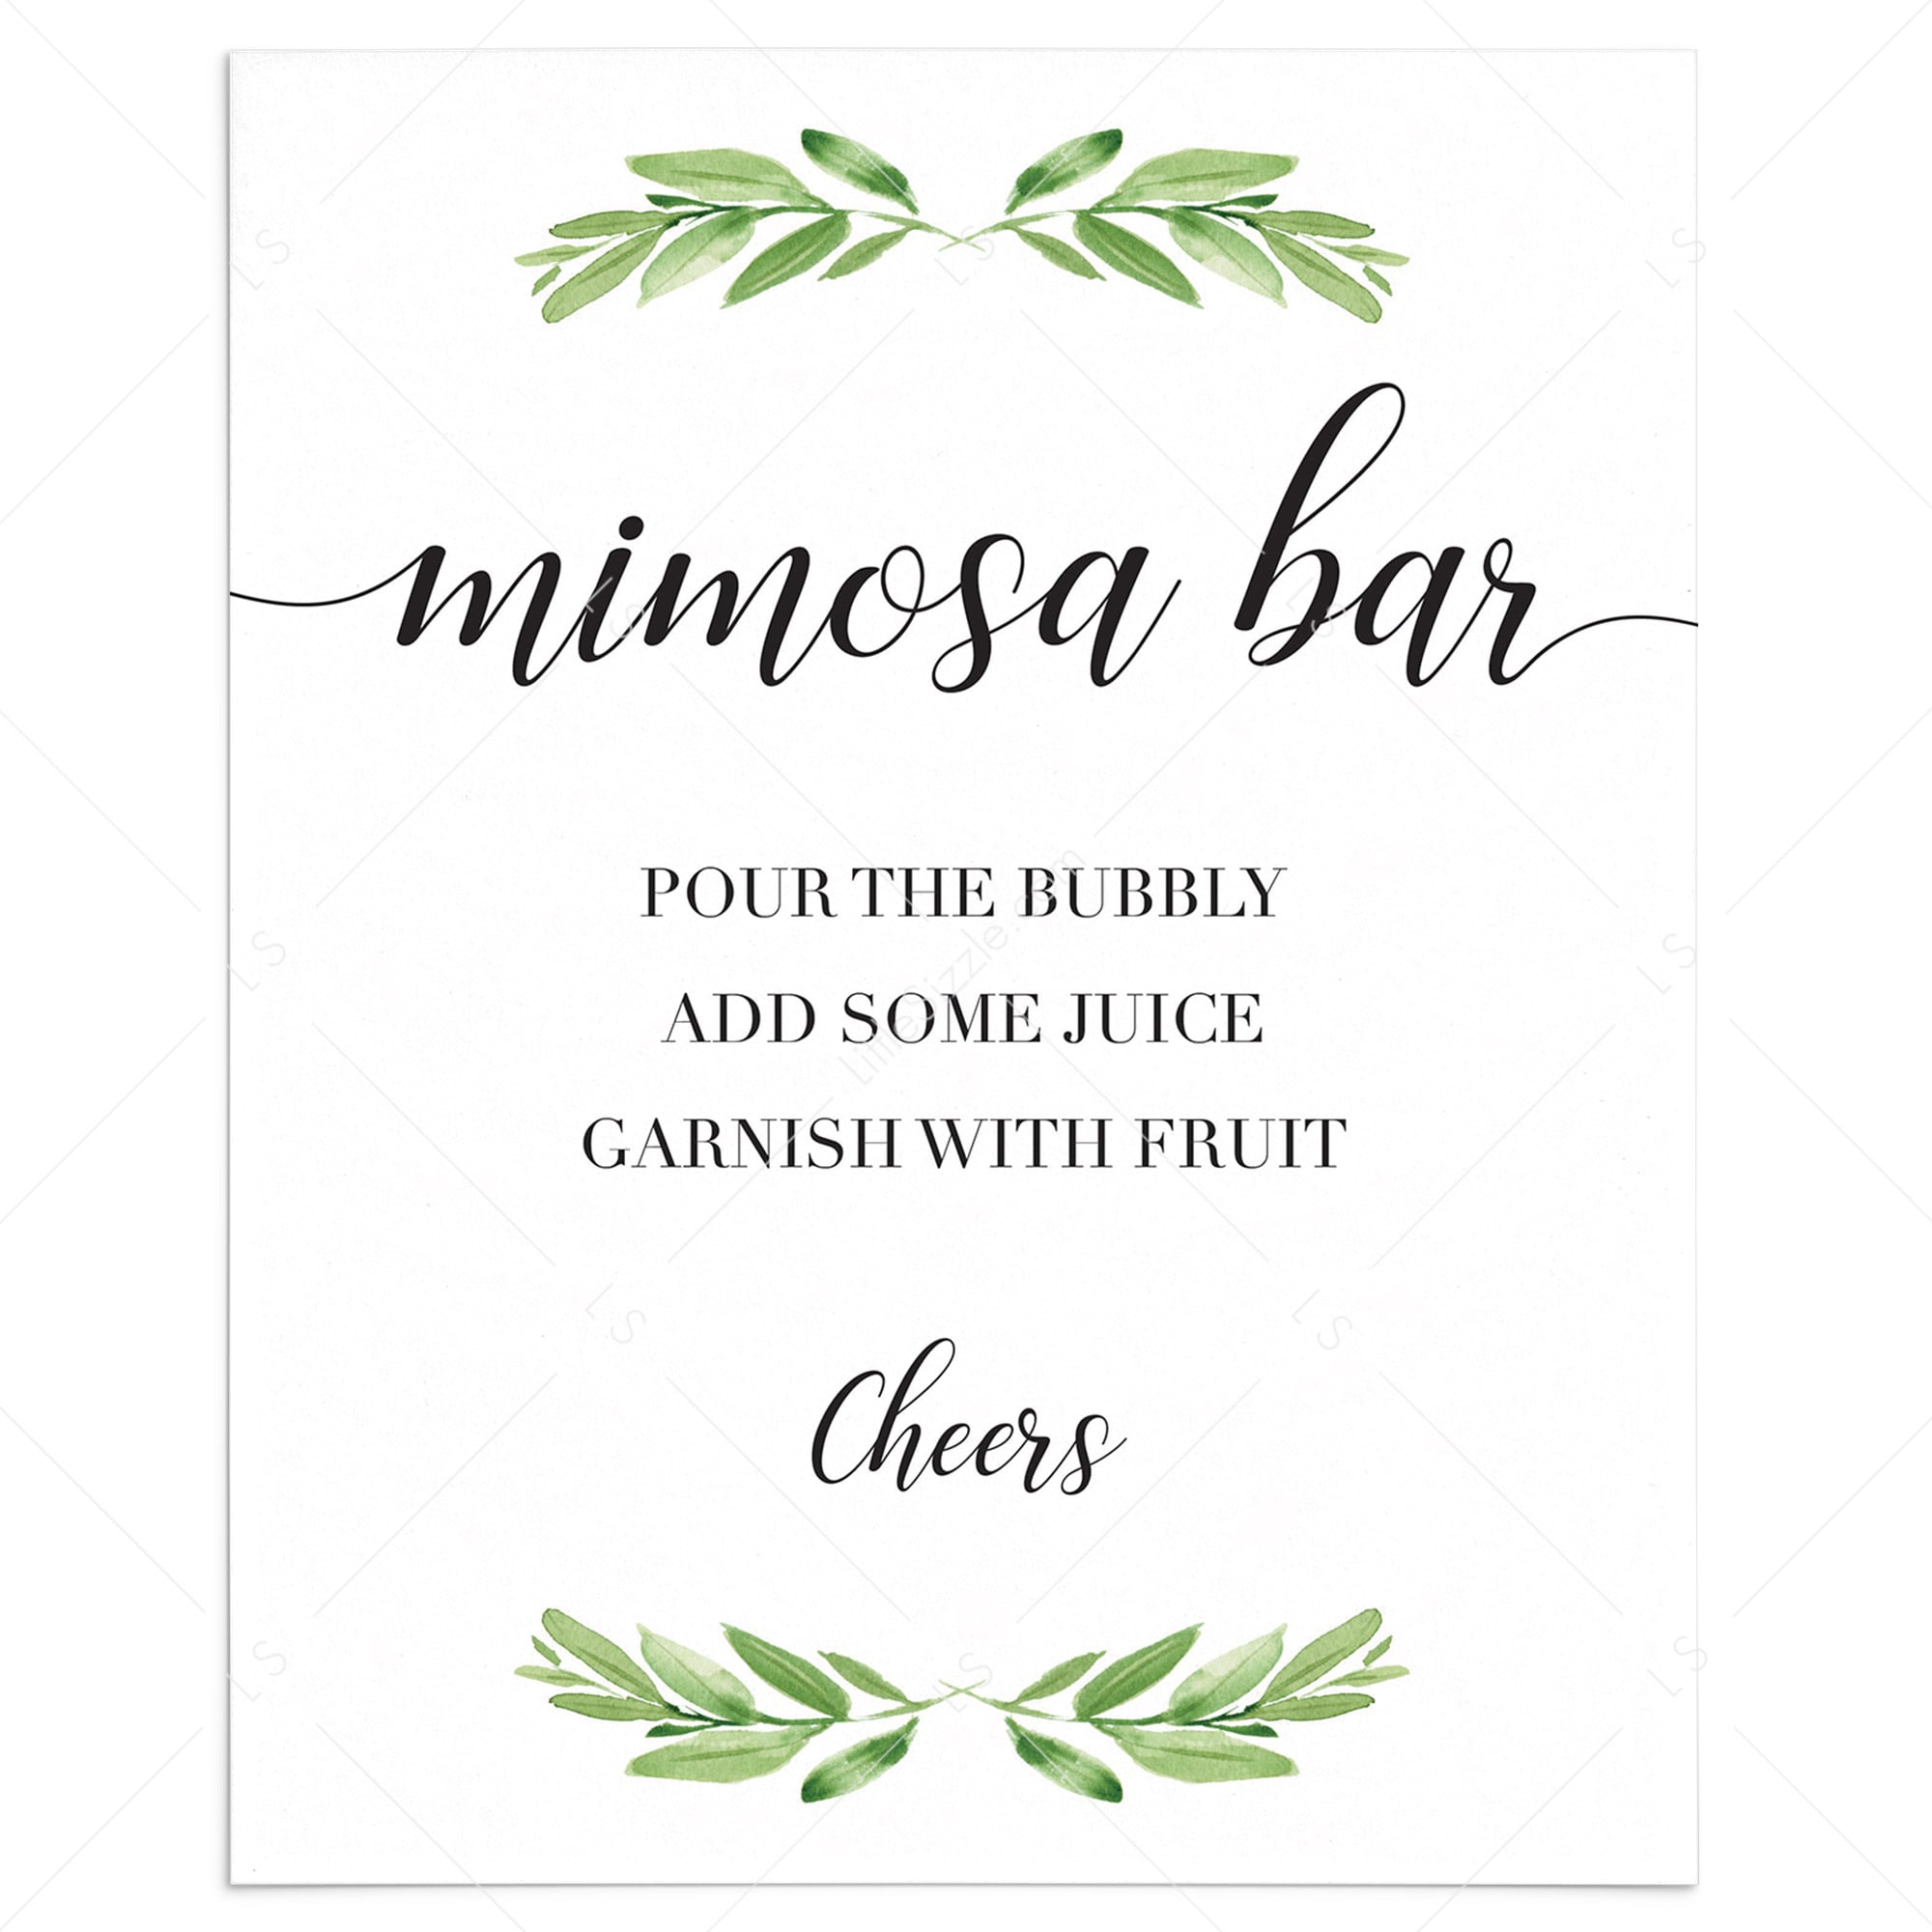 Printable mimosa bar table sign for greenery themed event by LittleSizzle